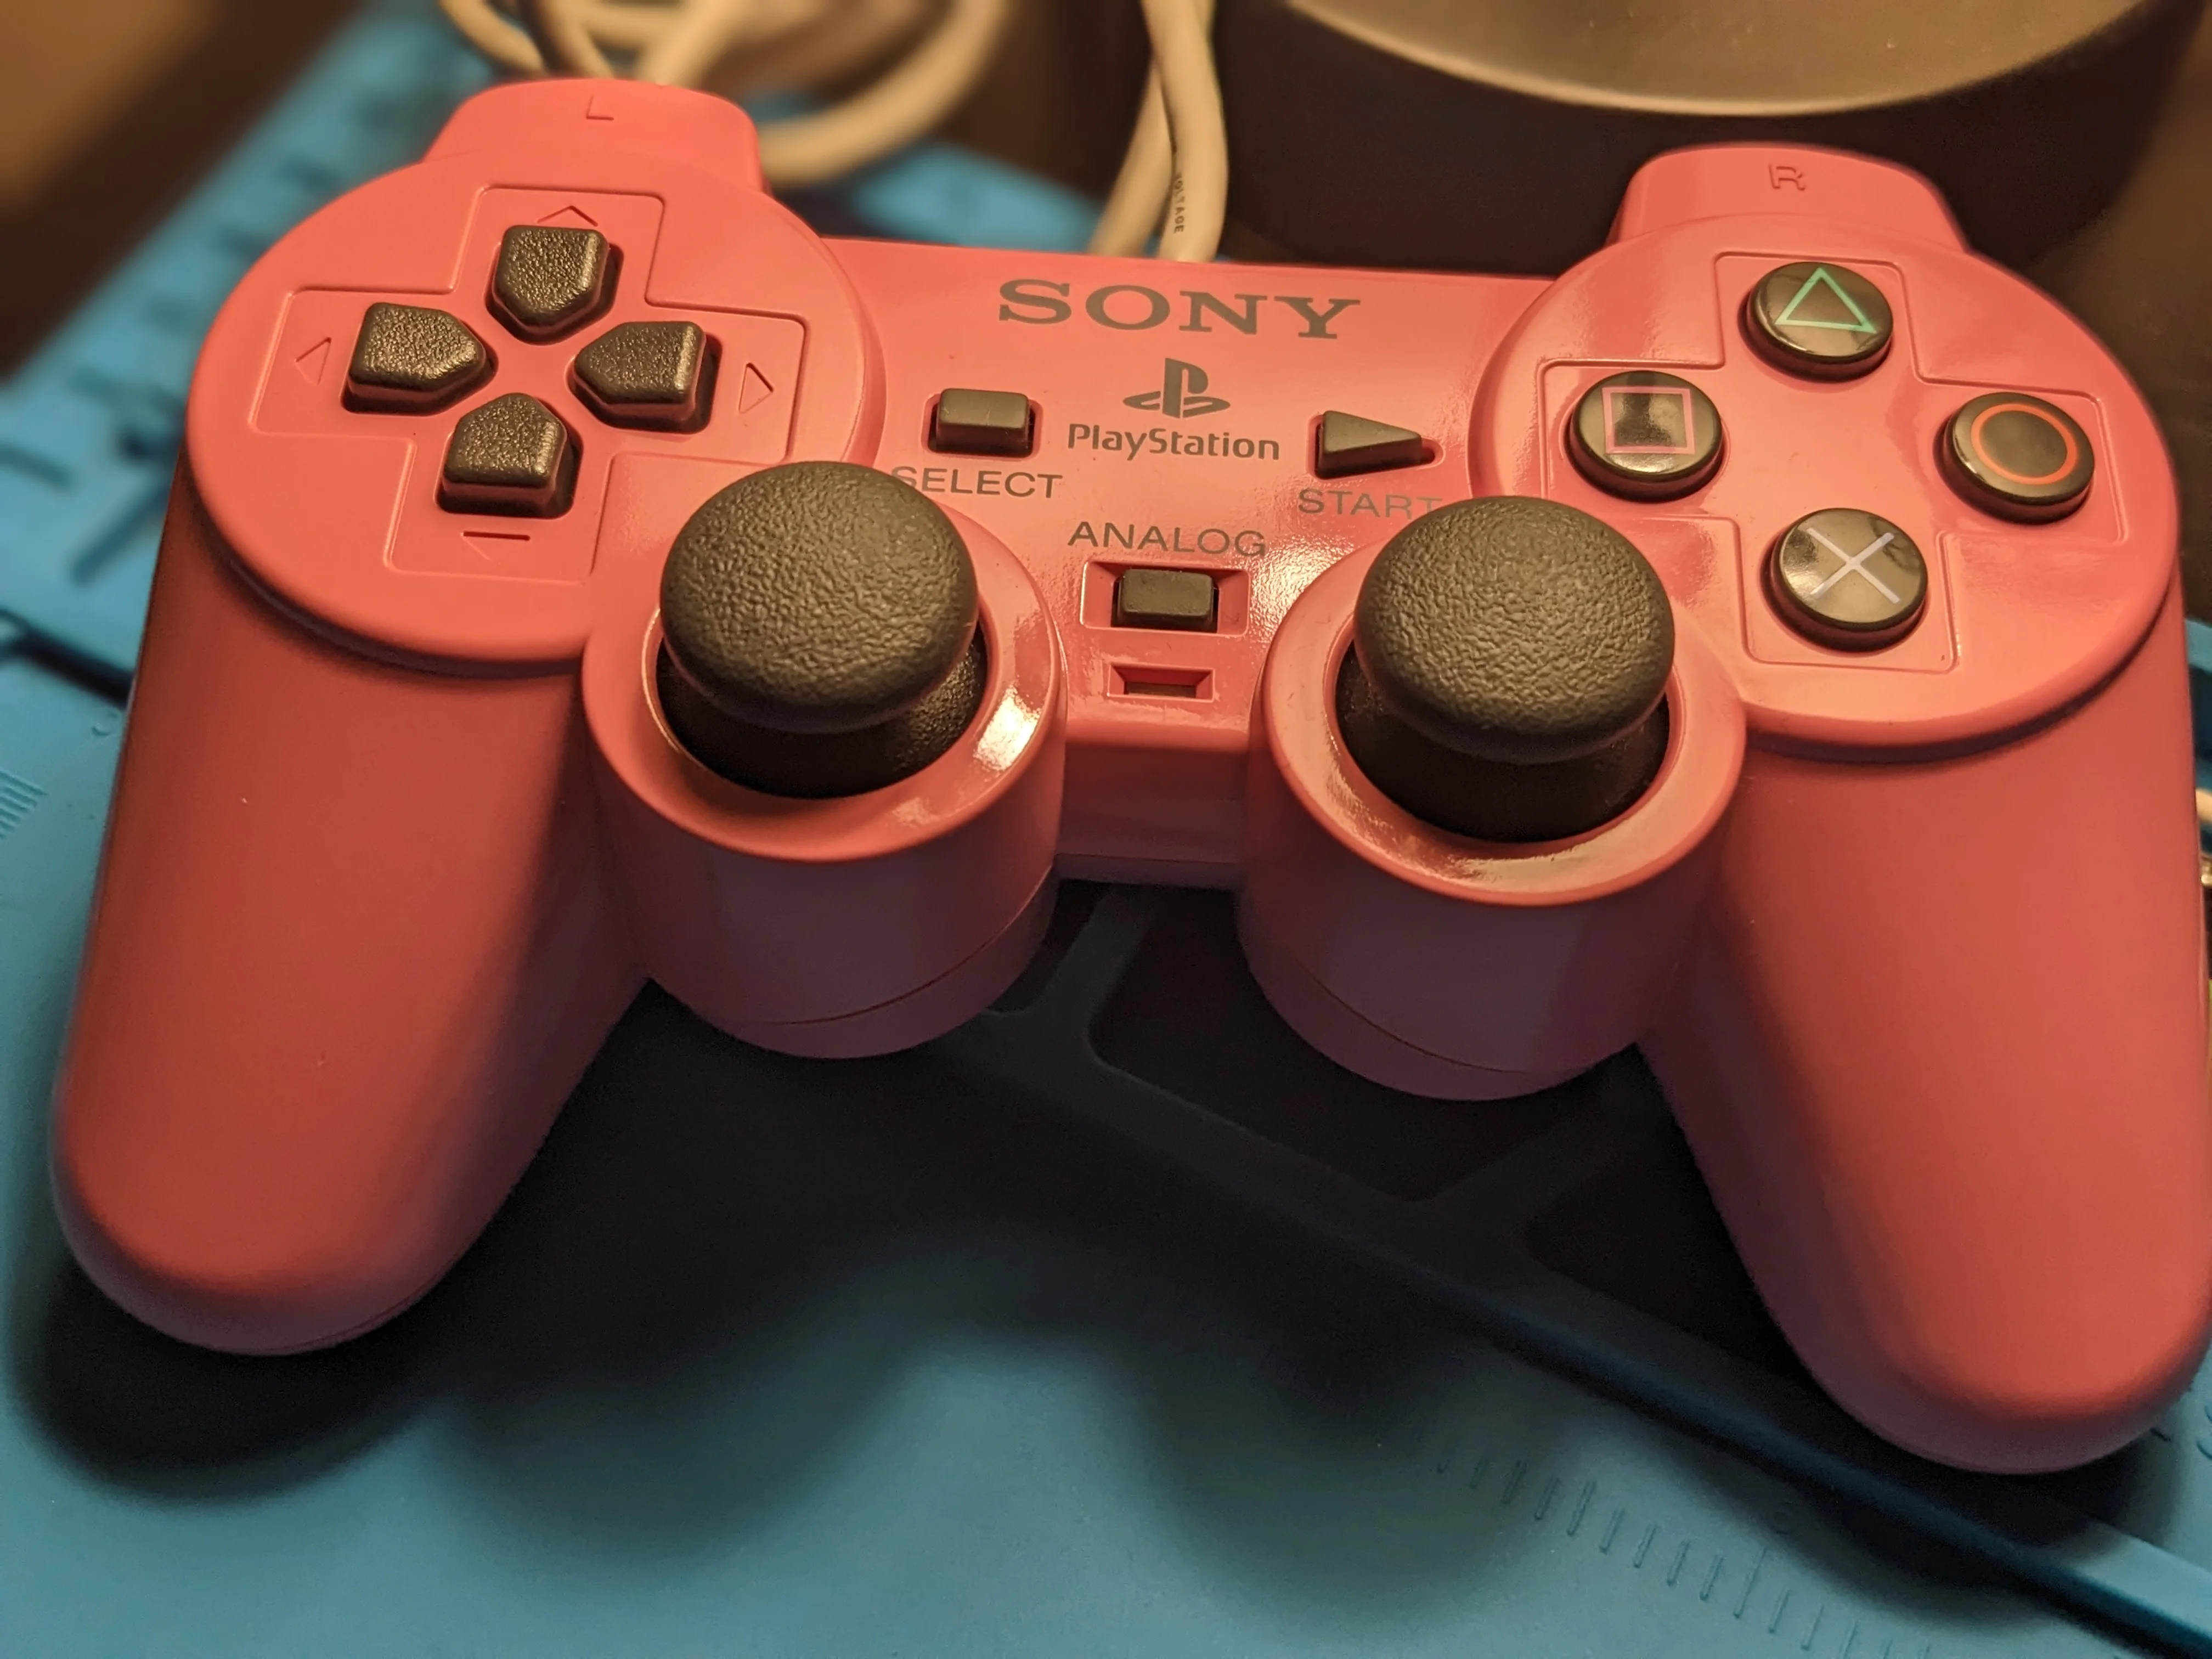 Playstation 2 Pink Controller Front 1678153827 69.webp?class=relatedcollectible